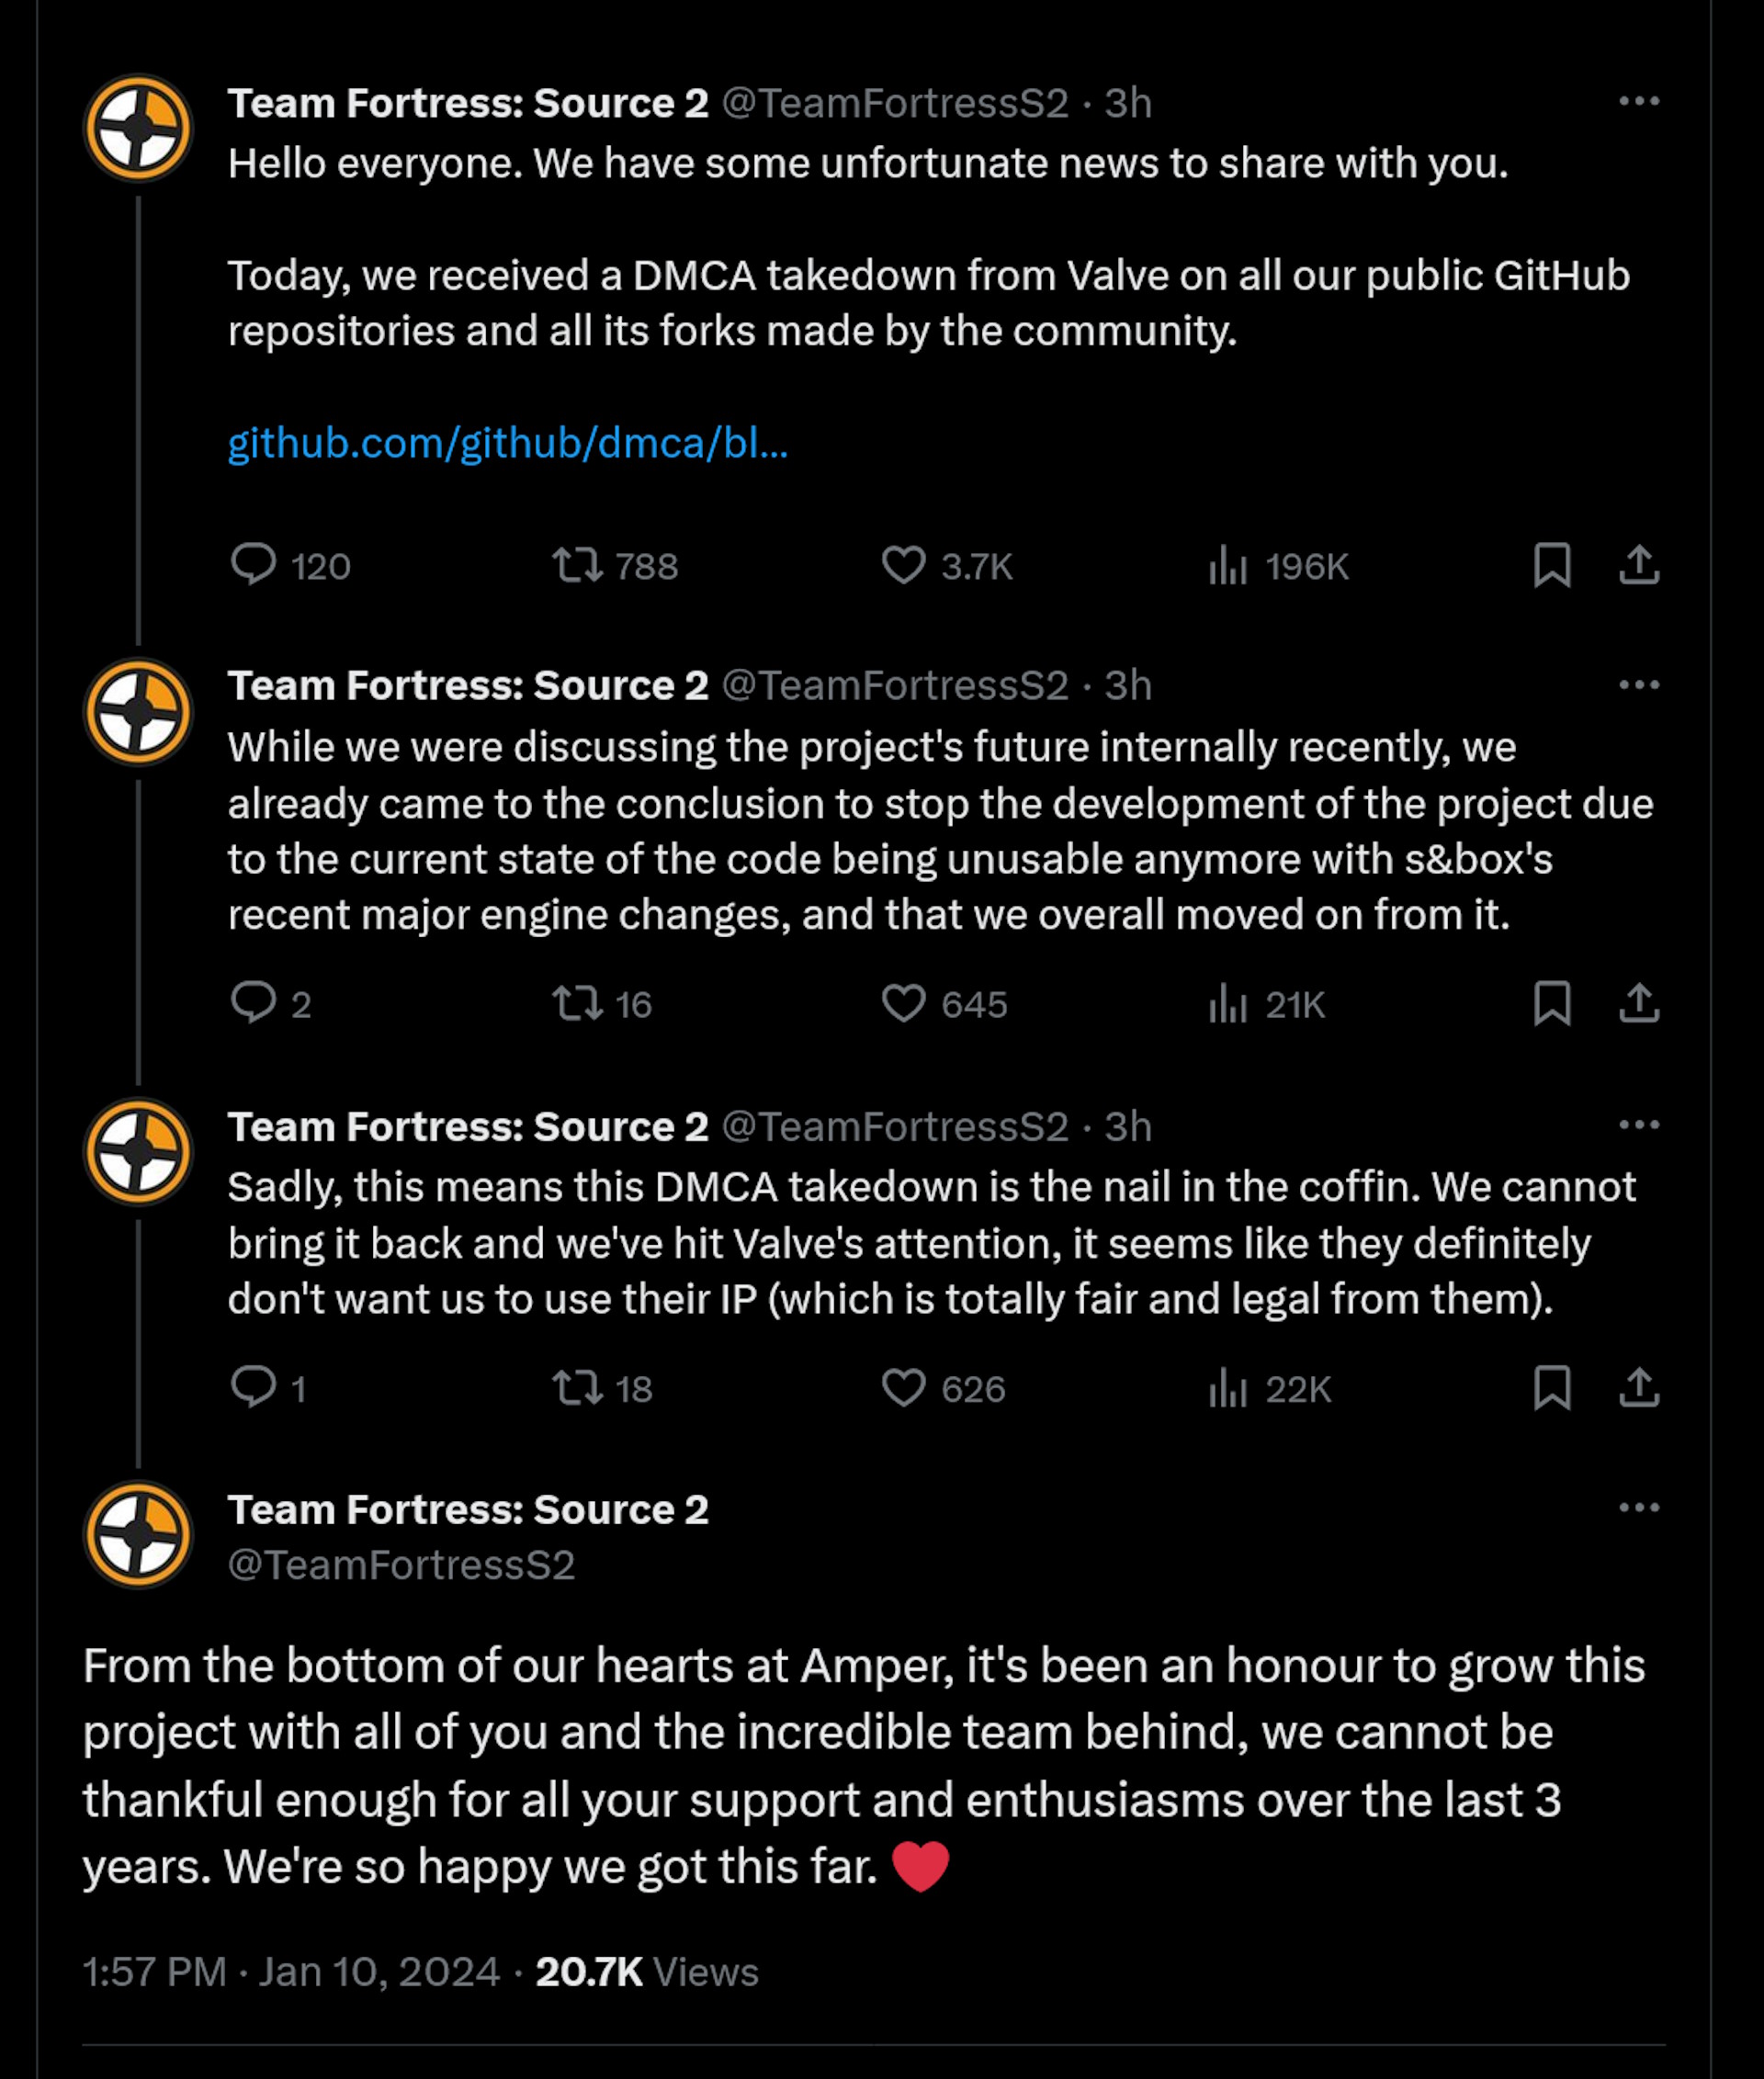 Hello everyone. We have some unfortunate news to share with you.  Today, we received a DMCA takedown from Valve on all our public GitHub repositories and all its forks made by the community. While we were discussing the project's future internally recently, we already came to the conclusion to stop the development of the project due to the current state of the code being unusable anymore with s&box's recent major engine changes, and that we overall moved on from it. Sadly, this means this DMCA takedown is the nail in the coffin. We cannot bring it back and we've hit Valve's attention, it seems like they definitely don't want us to use their IP (which is totally fair and legal from them). From the bottom of our hearts at Amper, it's been an honour to grow this project with all of you and the incredible team behind, we cannot be thankful enough for all your support and enthusiasms over the last 3 years. We're so happy we got this far. ❤️